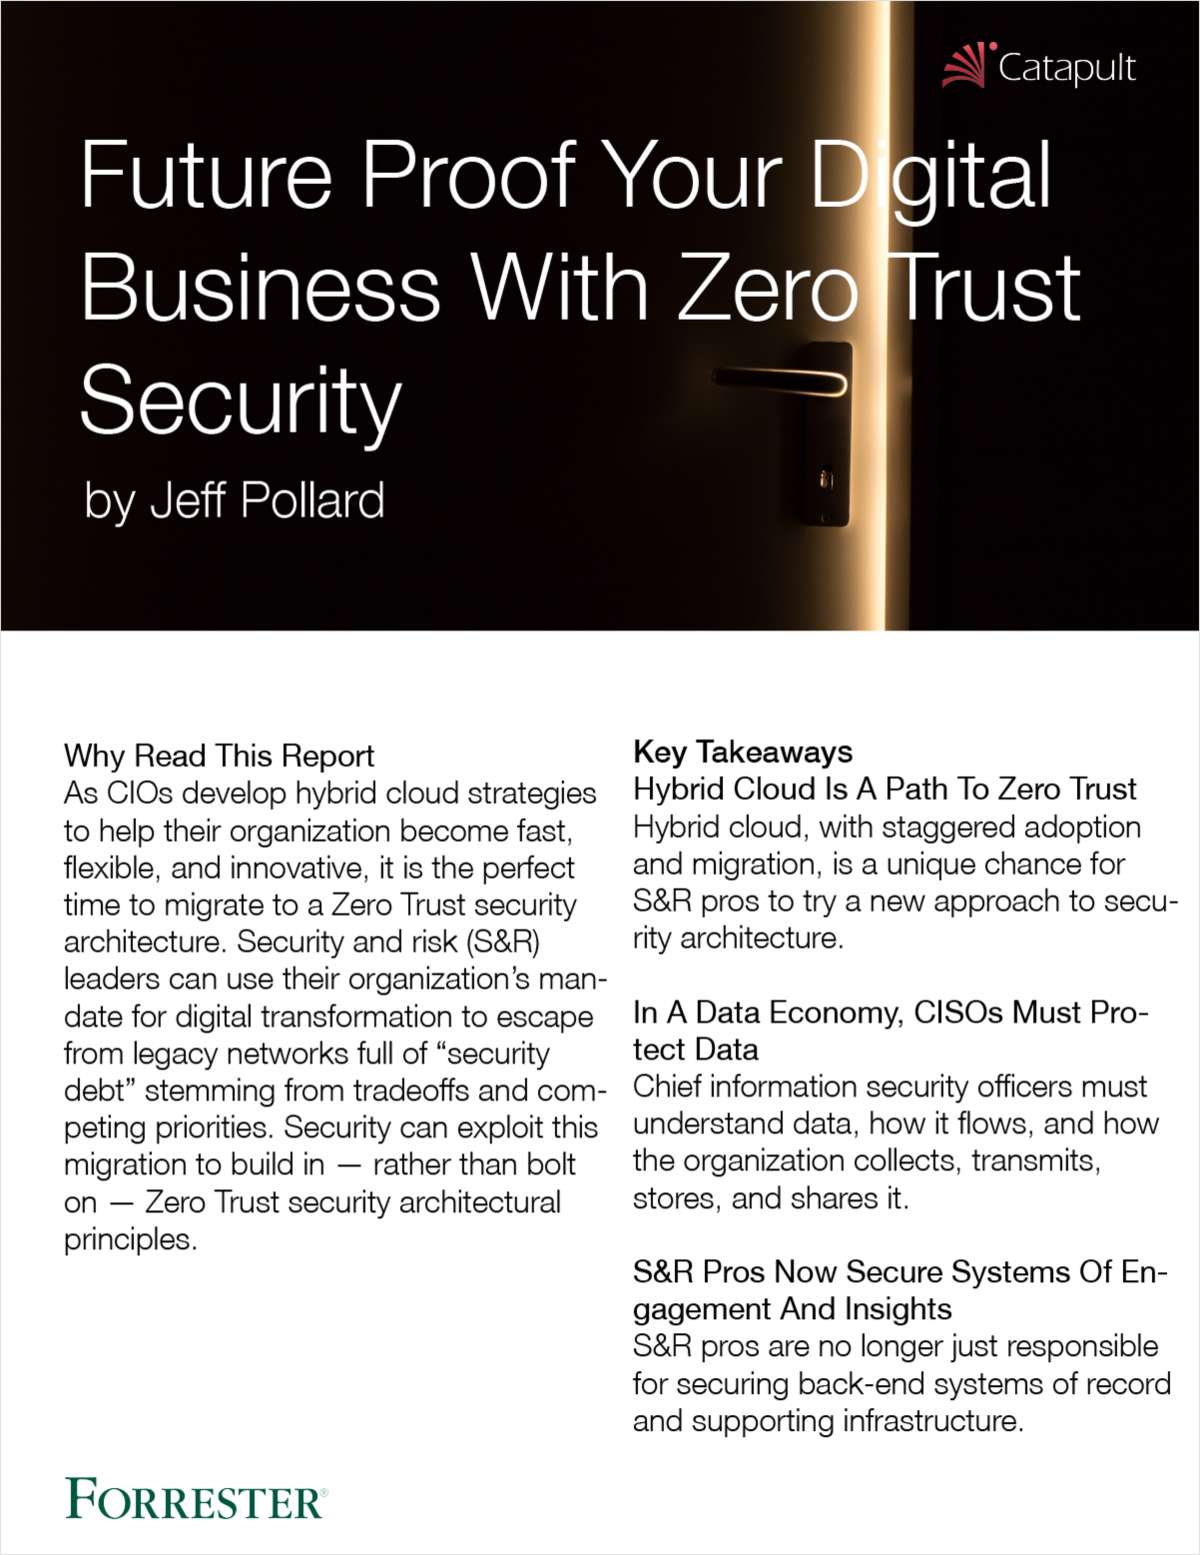 Future Proof Your Digital Business with Zero Trust Security